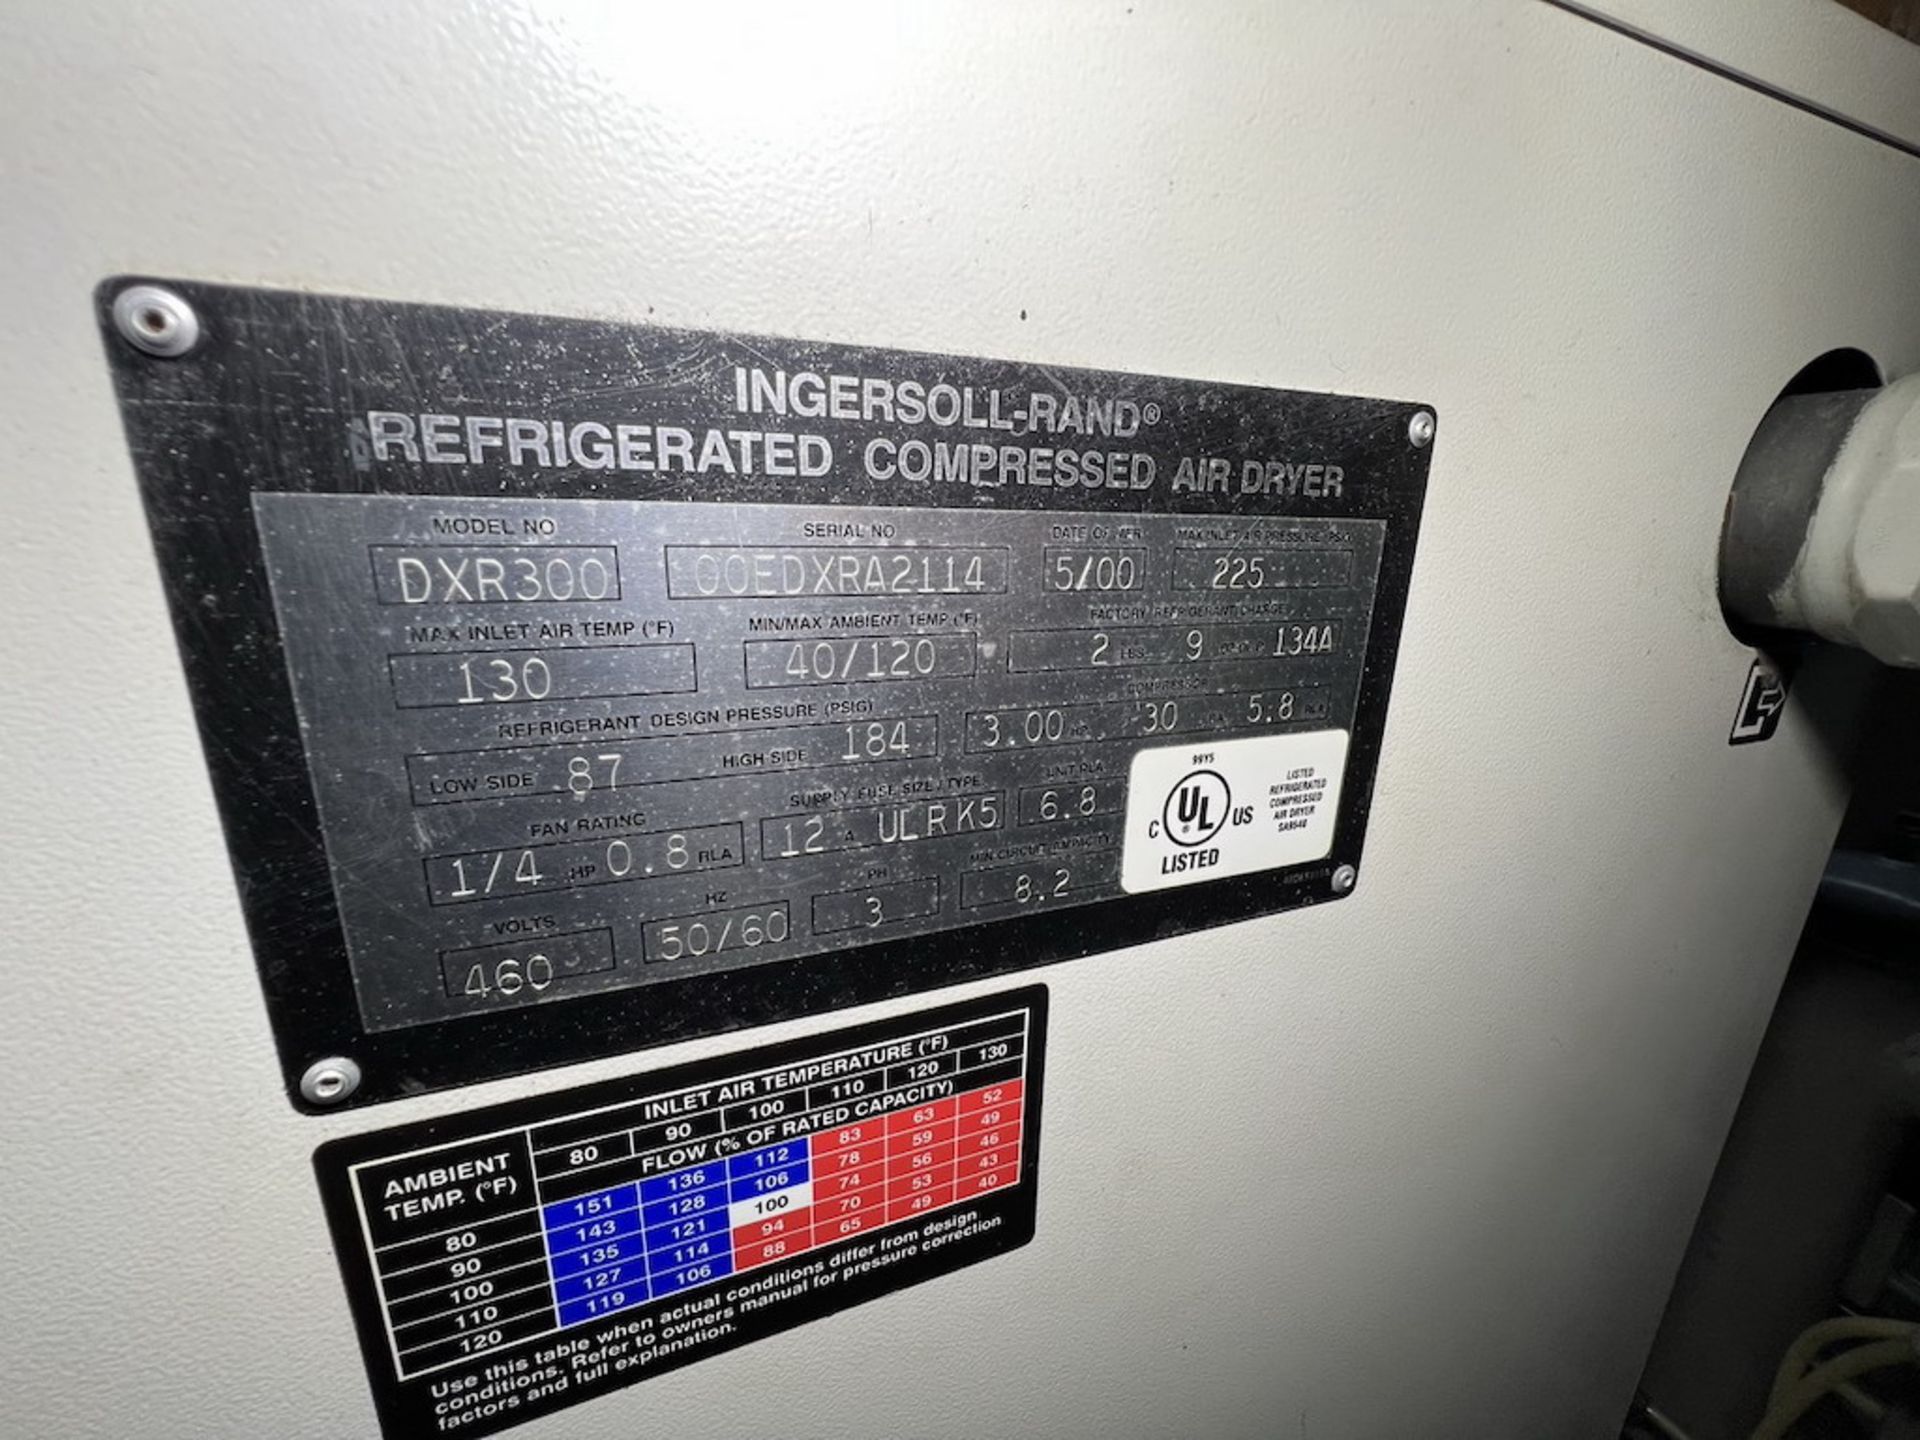 Ingersoll-Rand Refrigerated Compressed Air Dryer, - Image 5 of 11